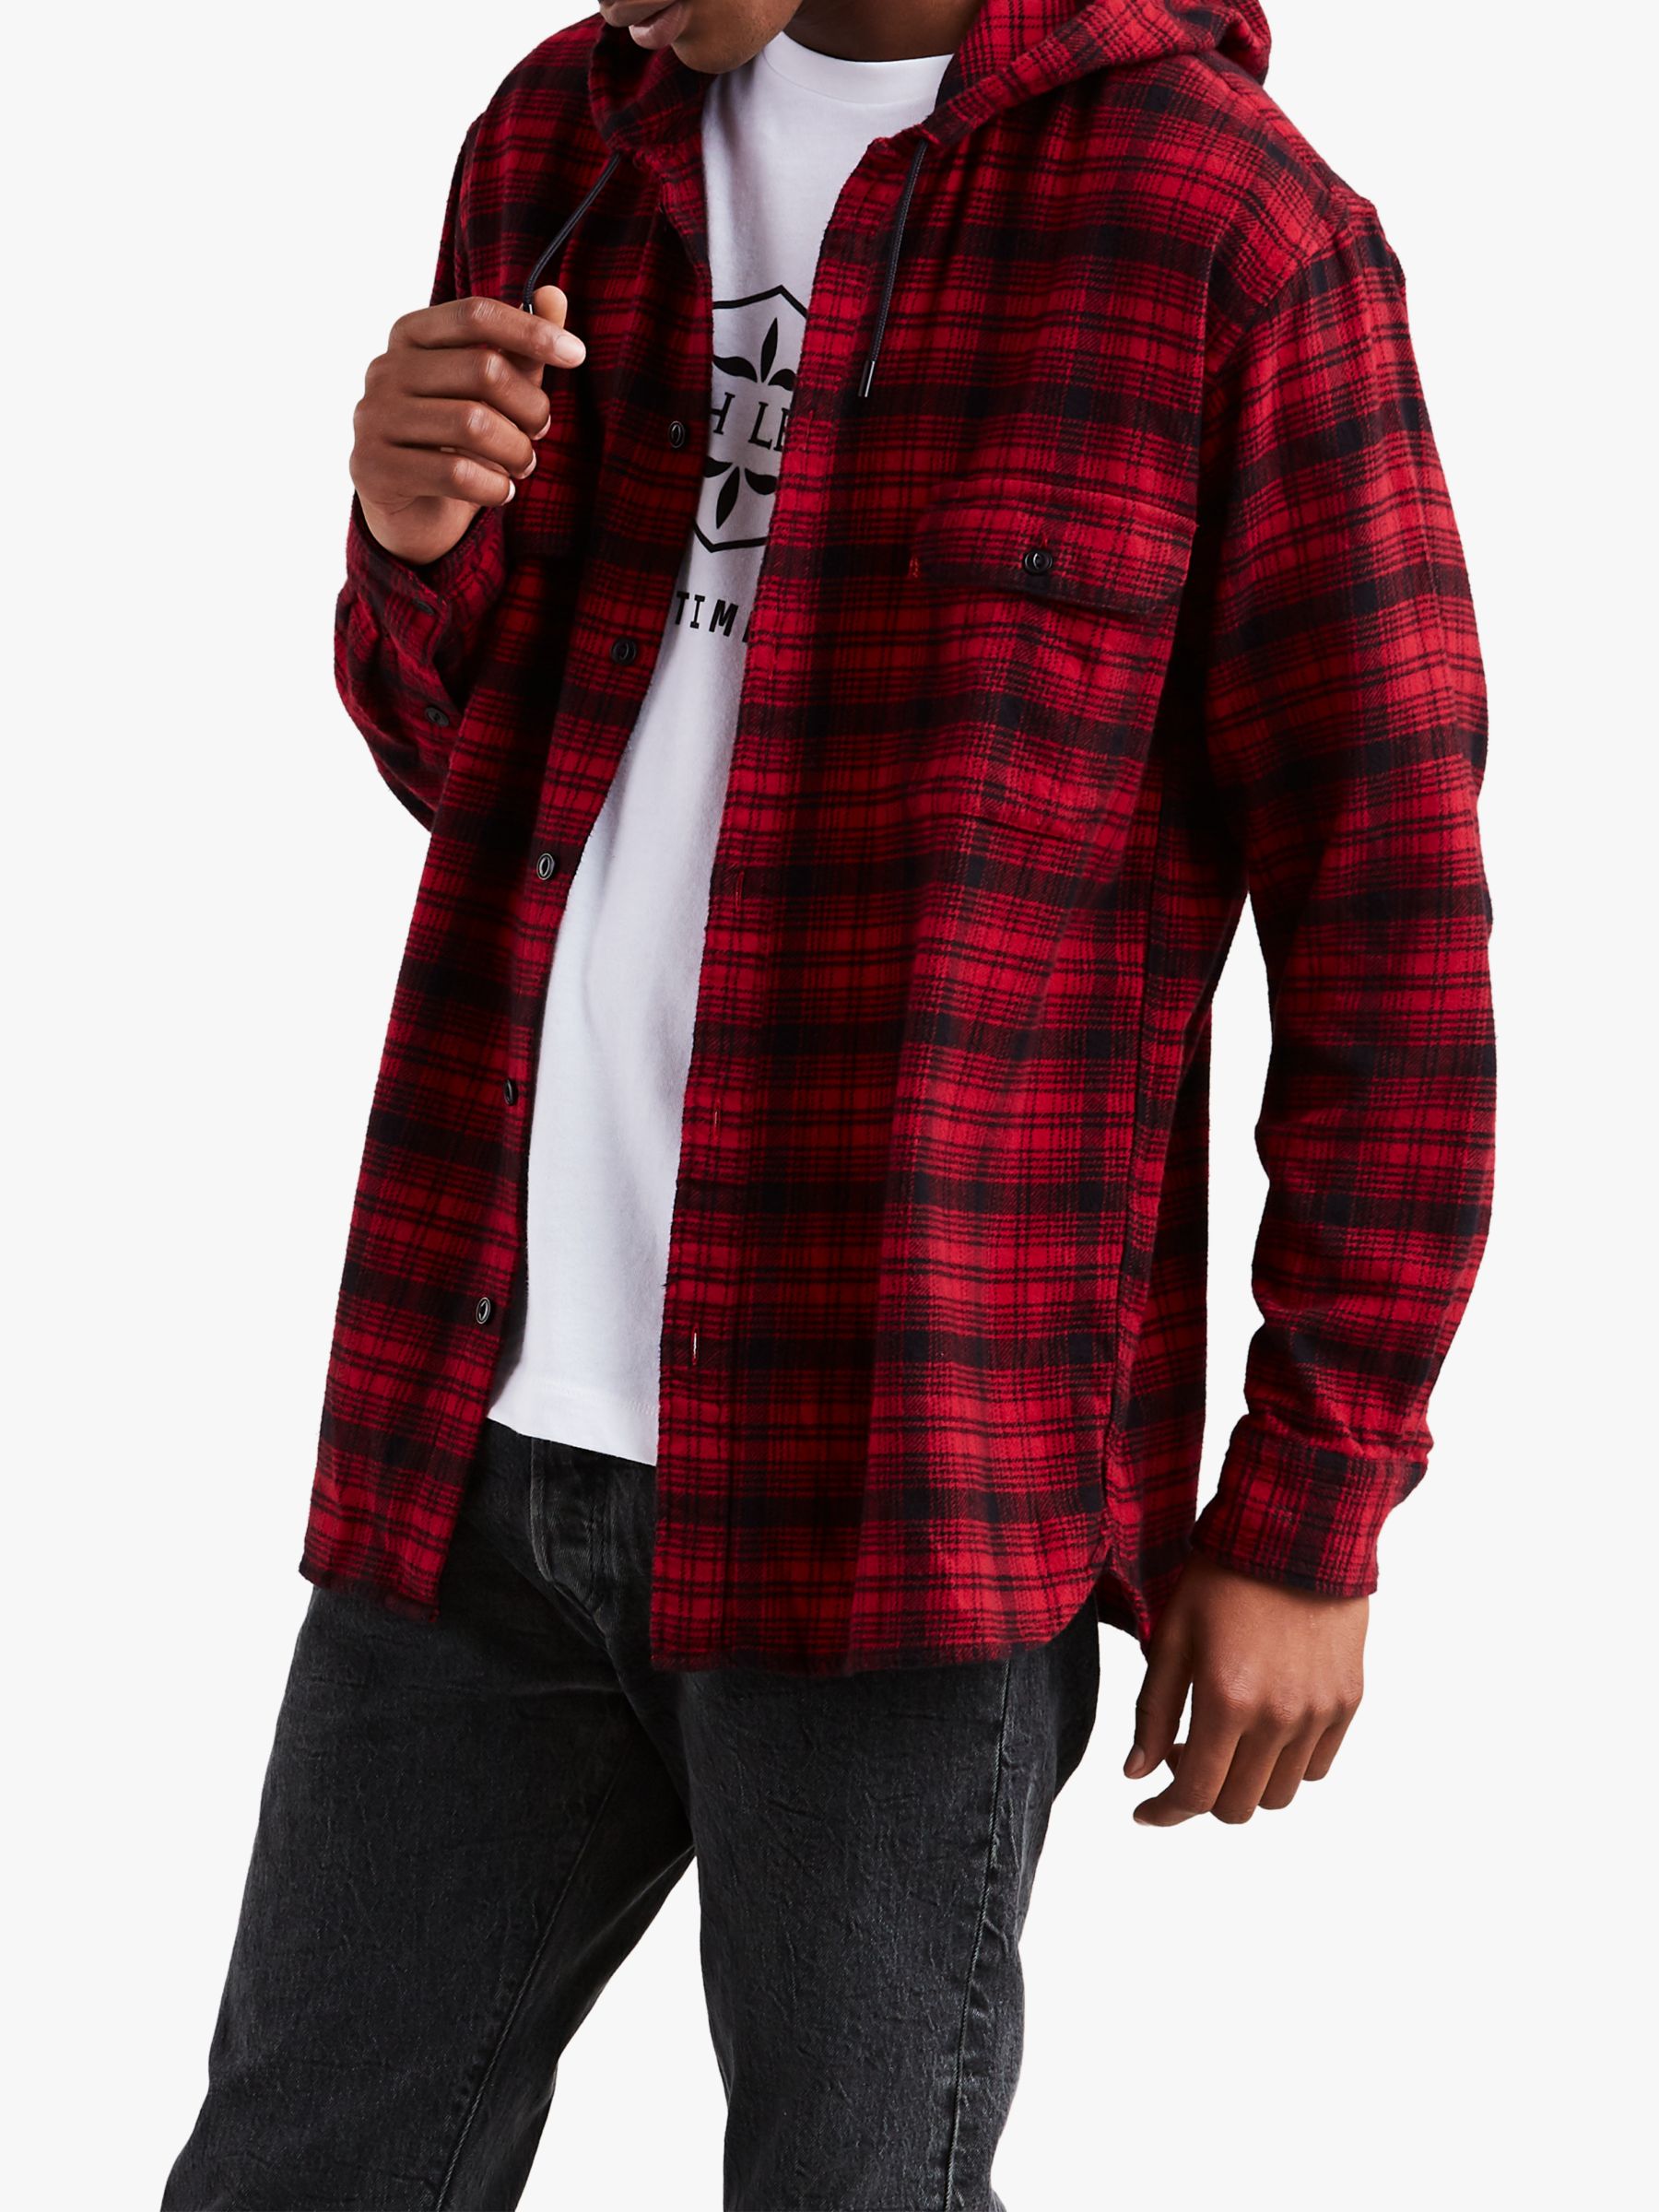 levi's hooded worker shirt